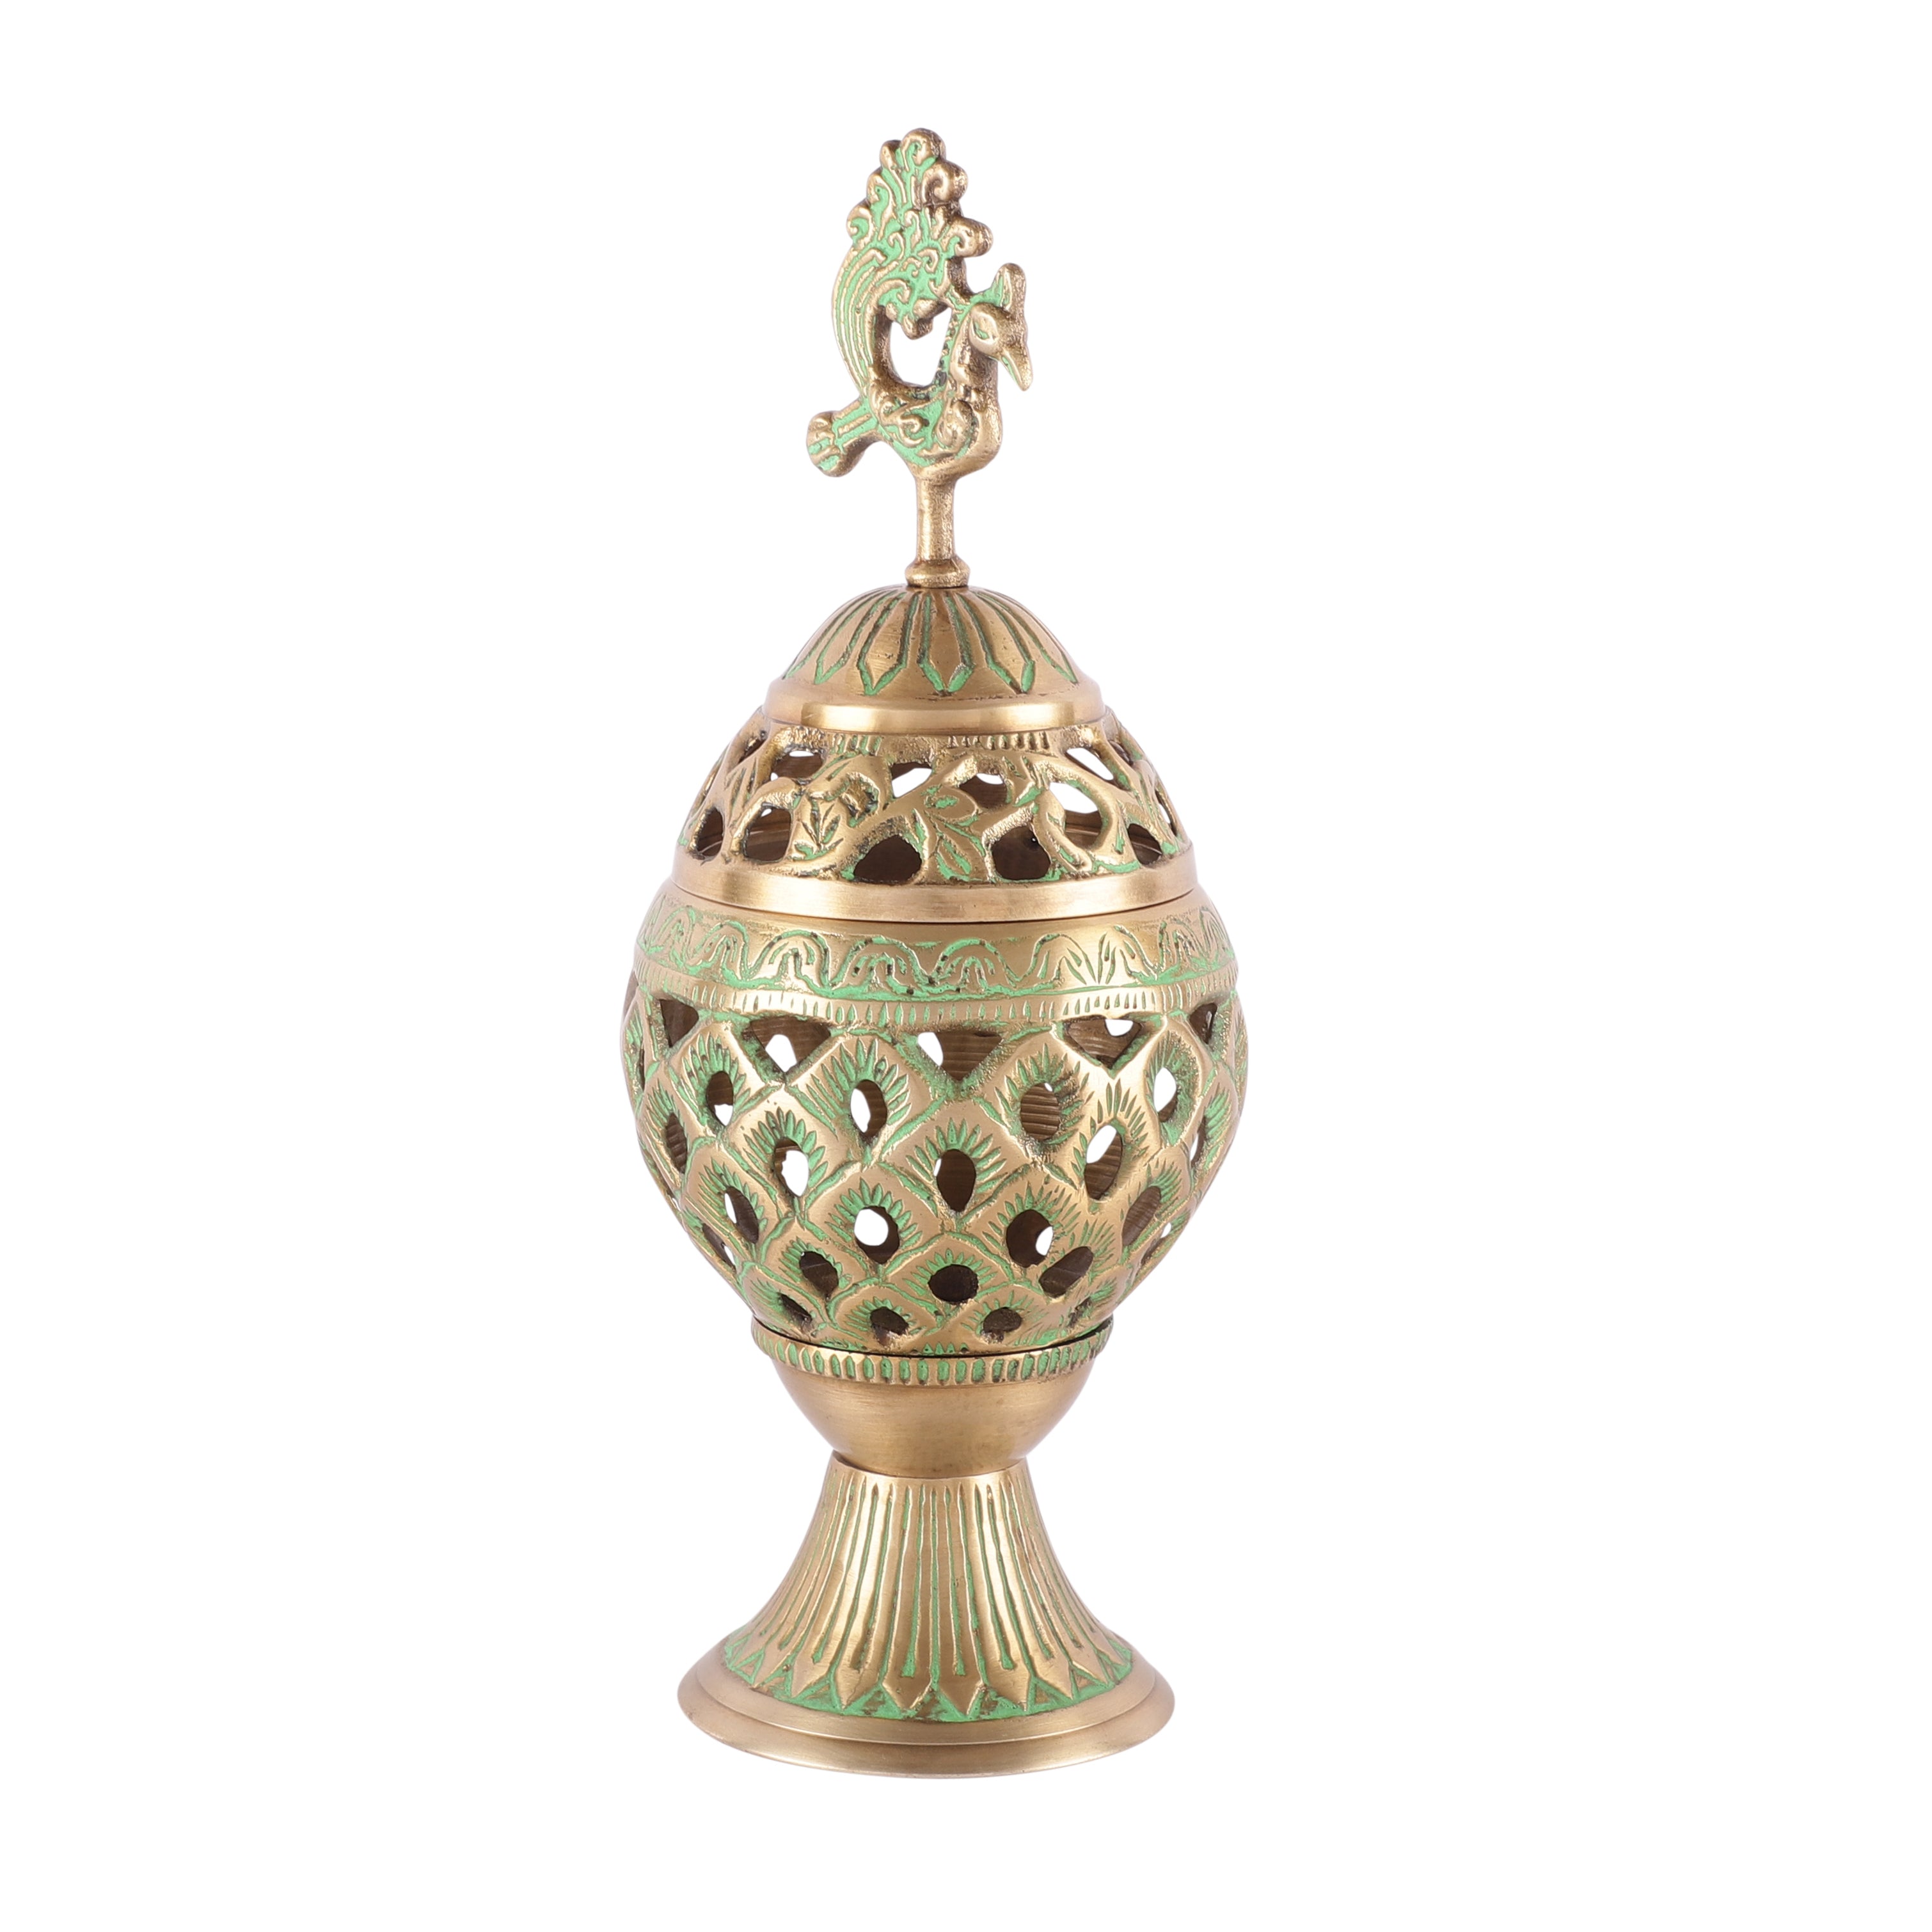 Peacock Dome Incense Holder